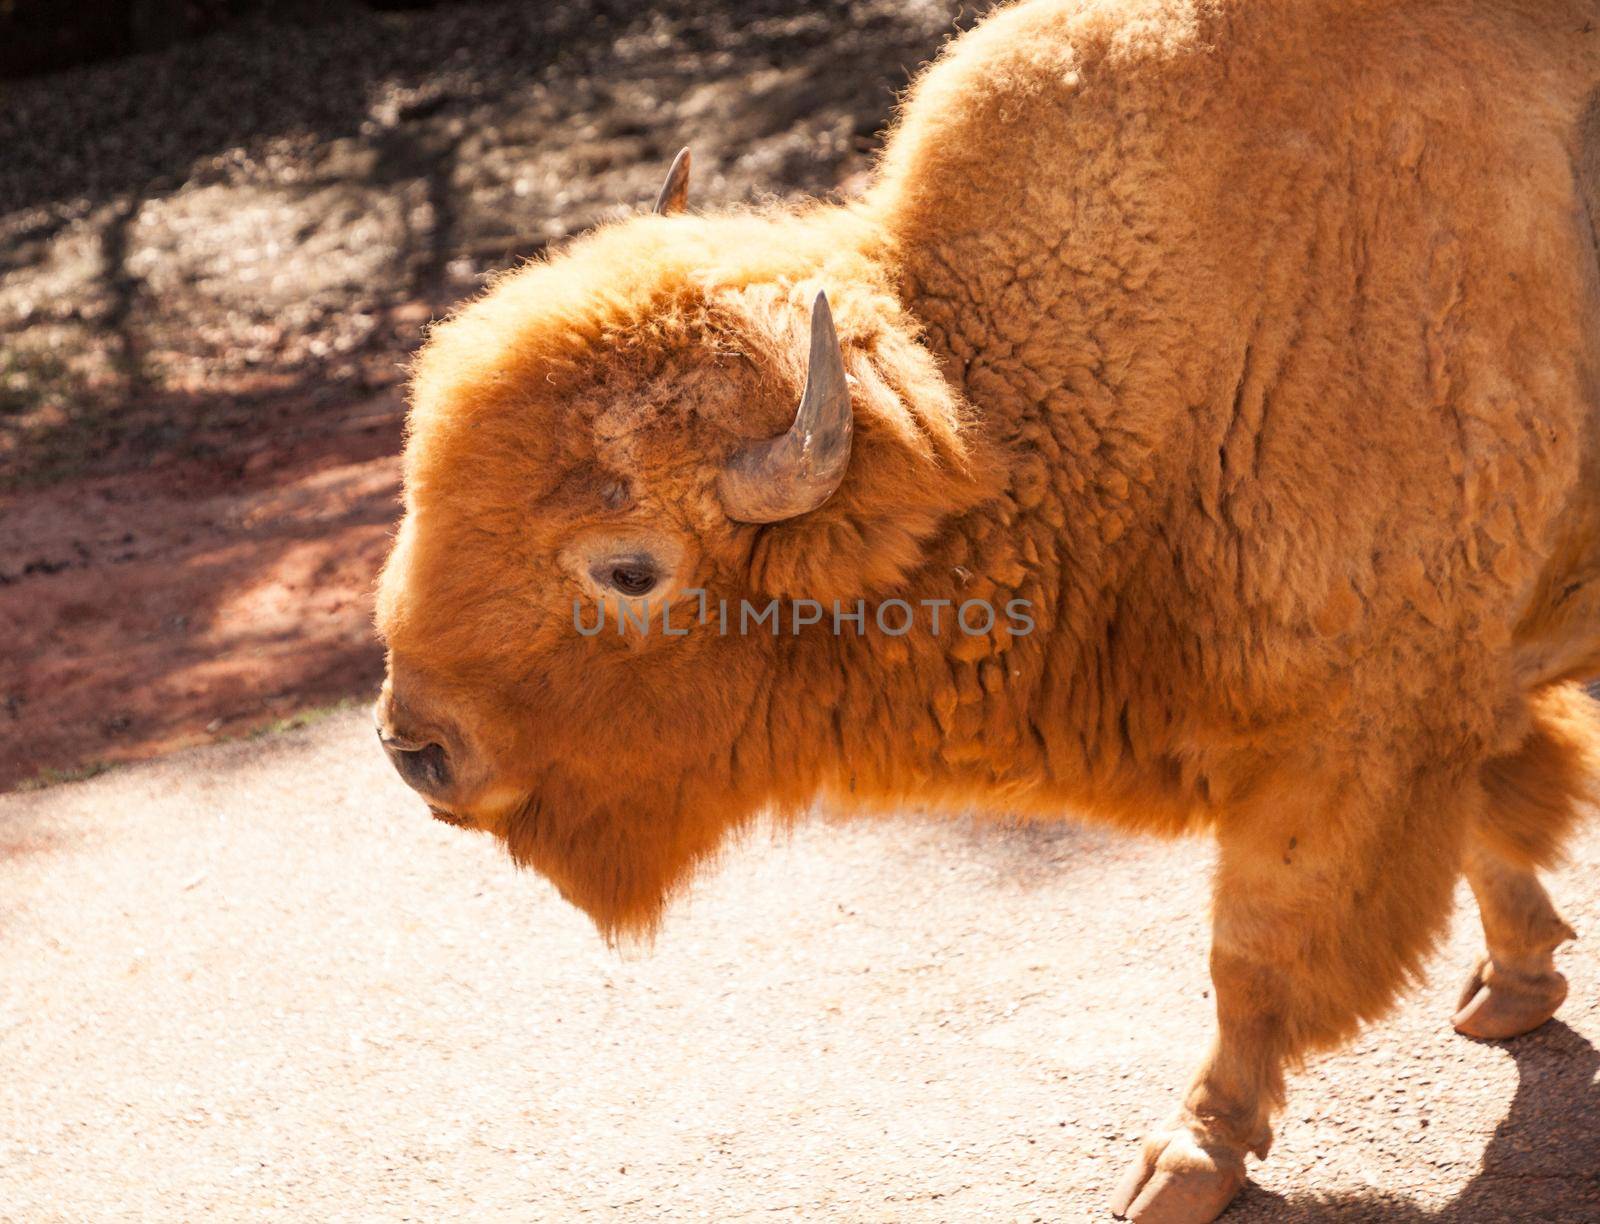 Red American bison also called Bison bison or American buffalo and is found in South Dakota.